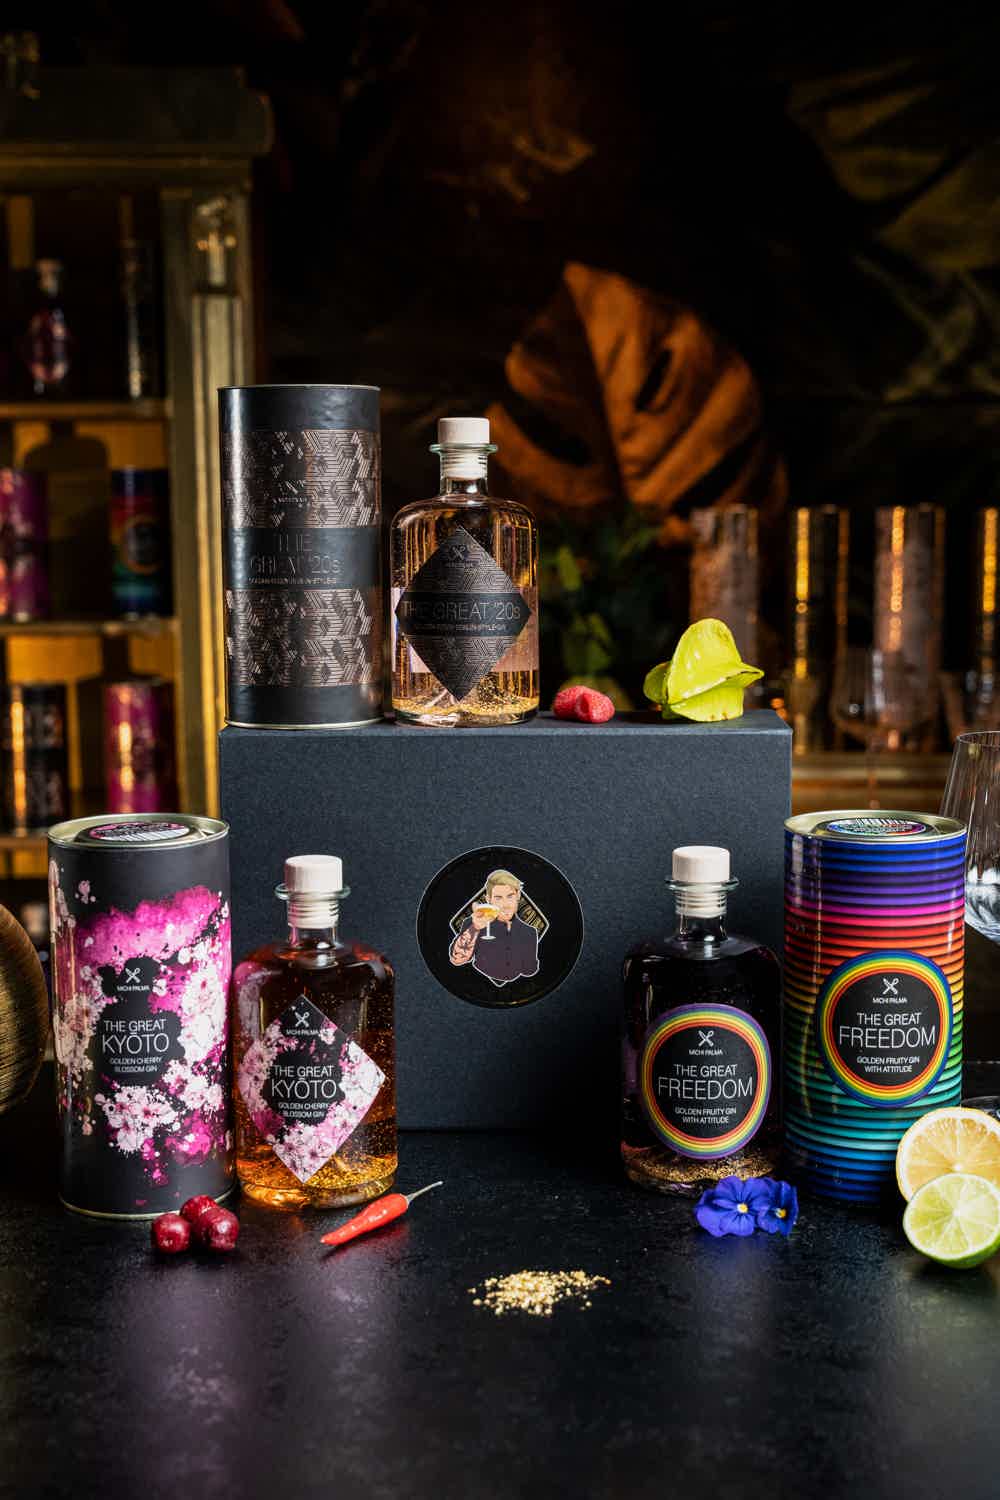 The Great Trio, Fruity Gin Gift Set: The Great '20s Golden-Berry-Berlin-Style Gin, The Great Freedom Golden-Fruity Gin, The Great Kyōto Golden-Cherry-Blossom Gin